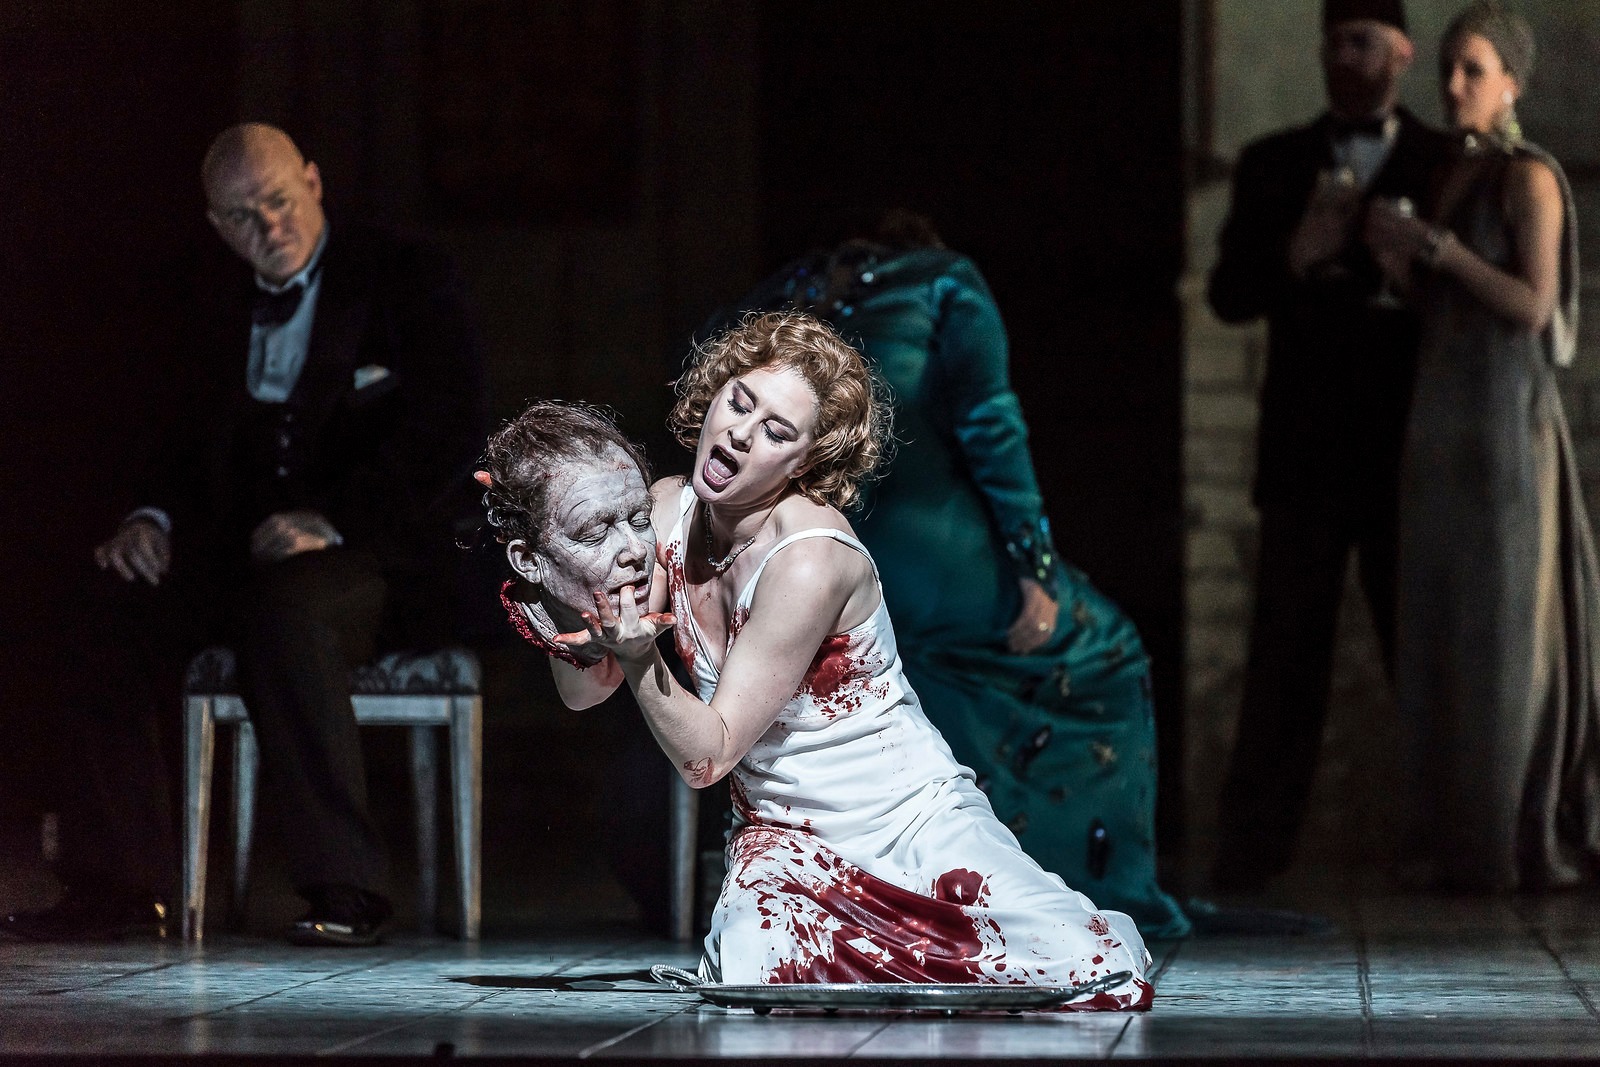 Salome 1 - photo by Clive Barda